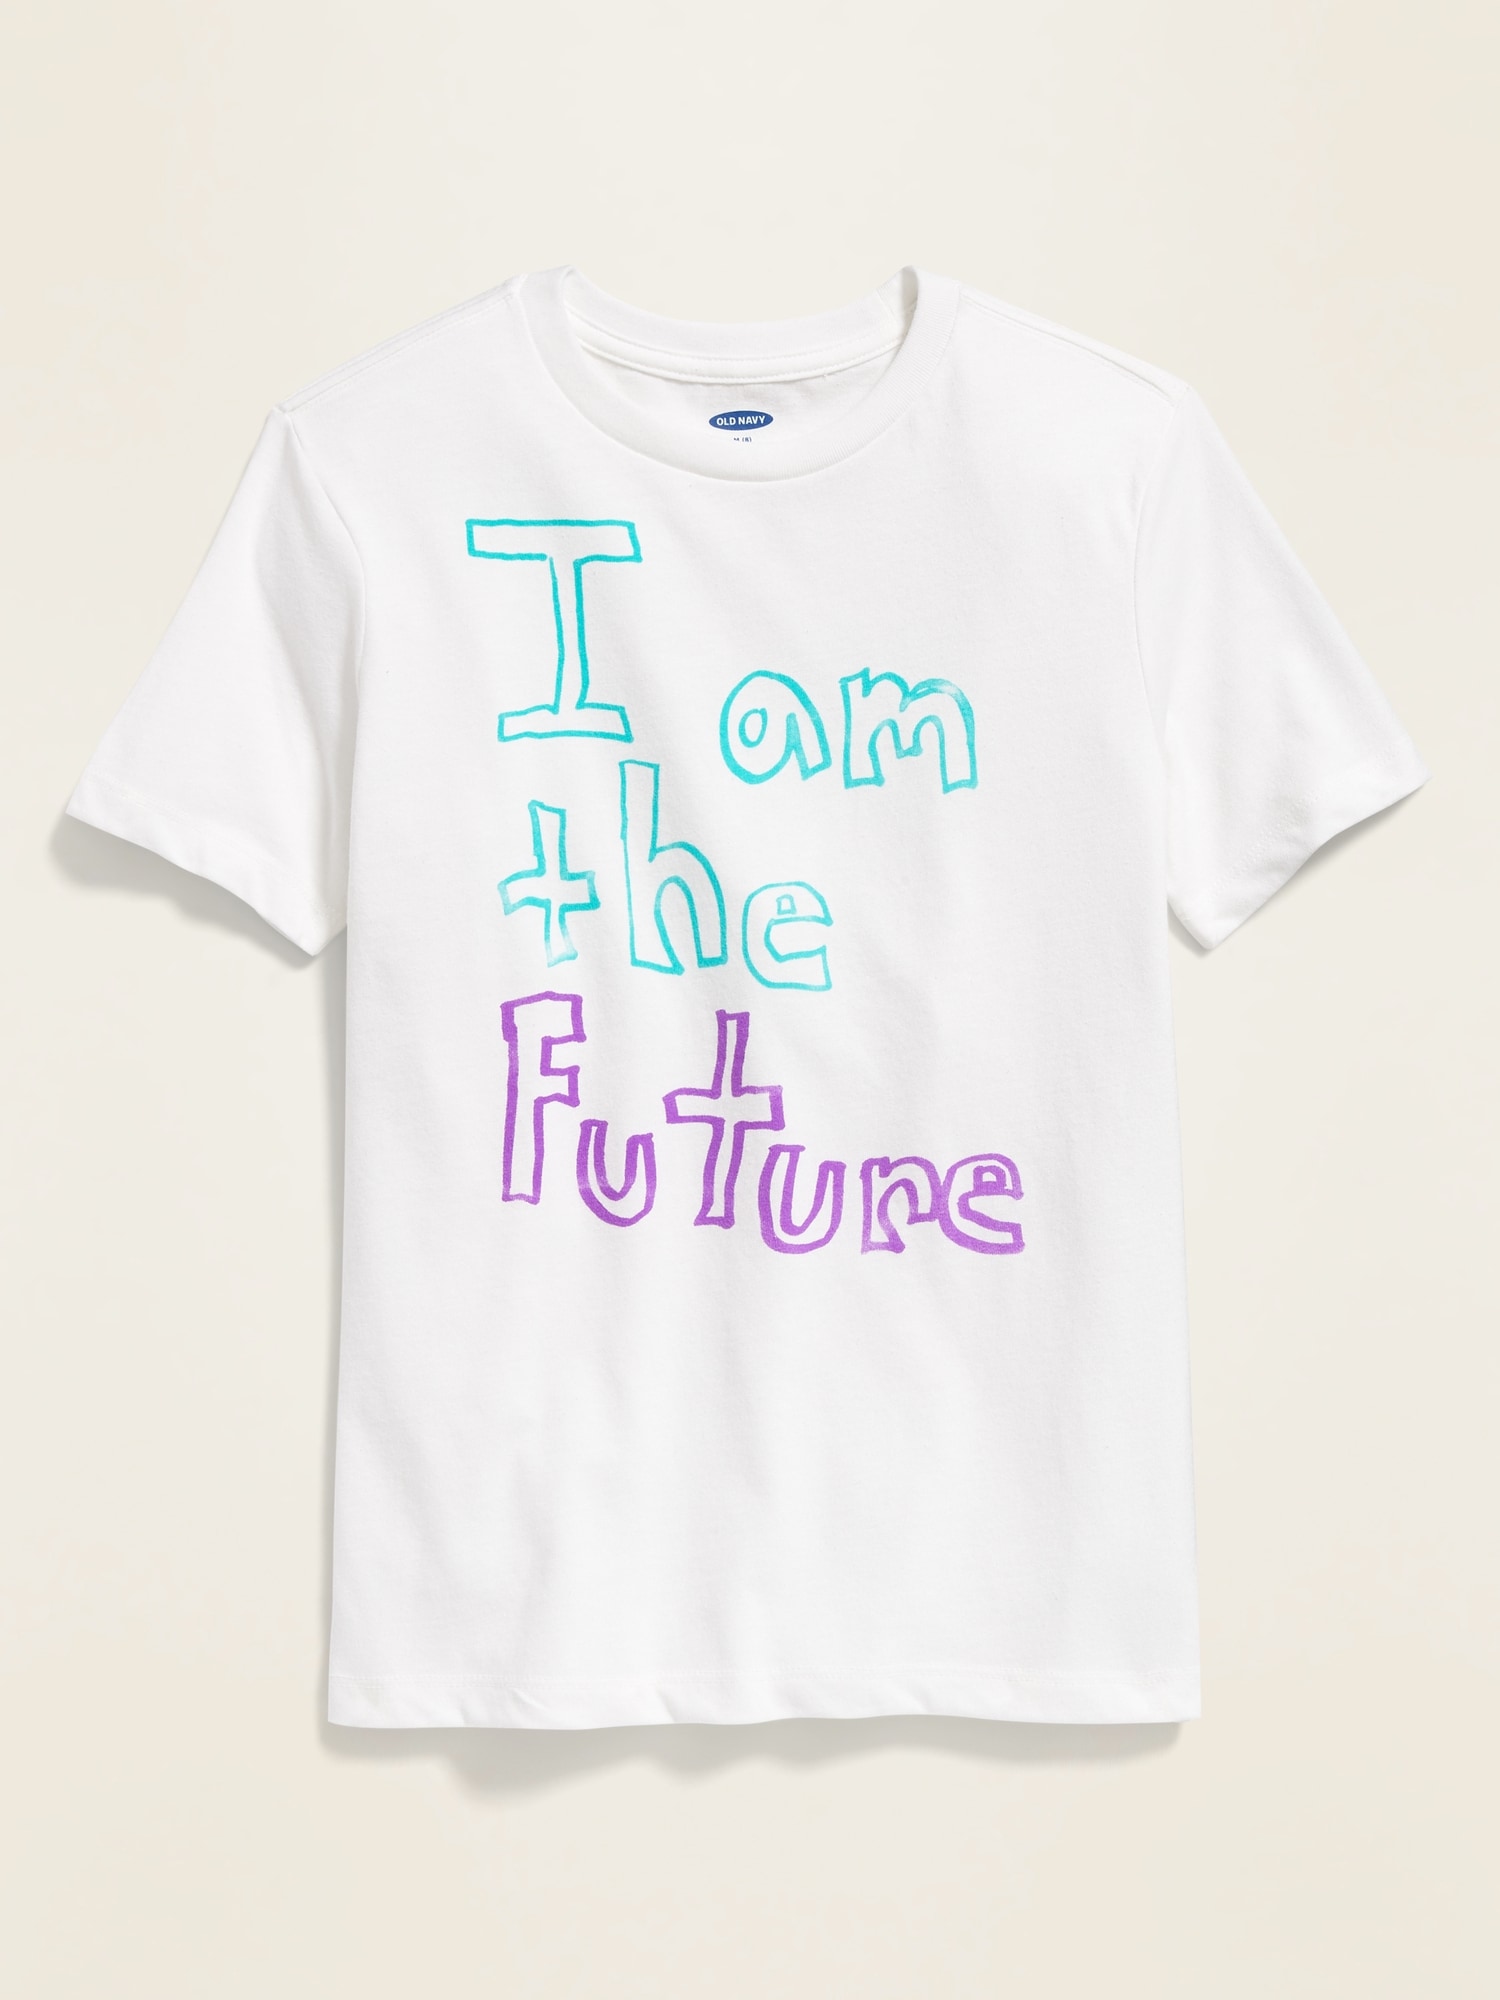 Limited Edition Boys Girls Club Collection Graphic Tee For Boys Old Navy - old navy roblox tee